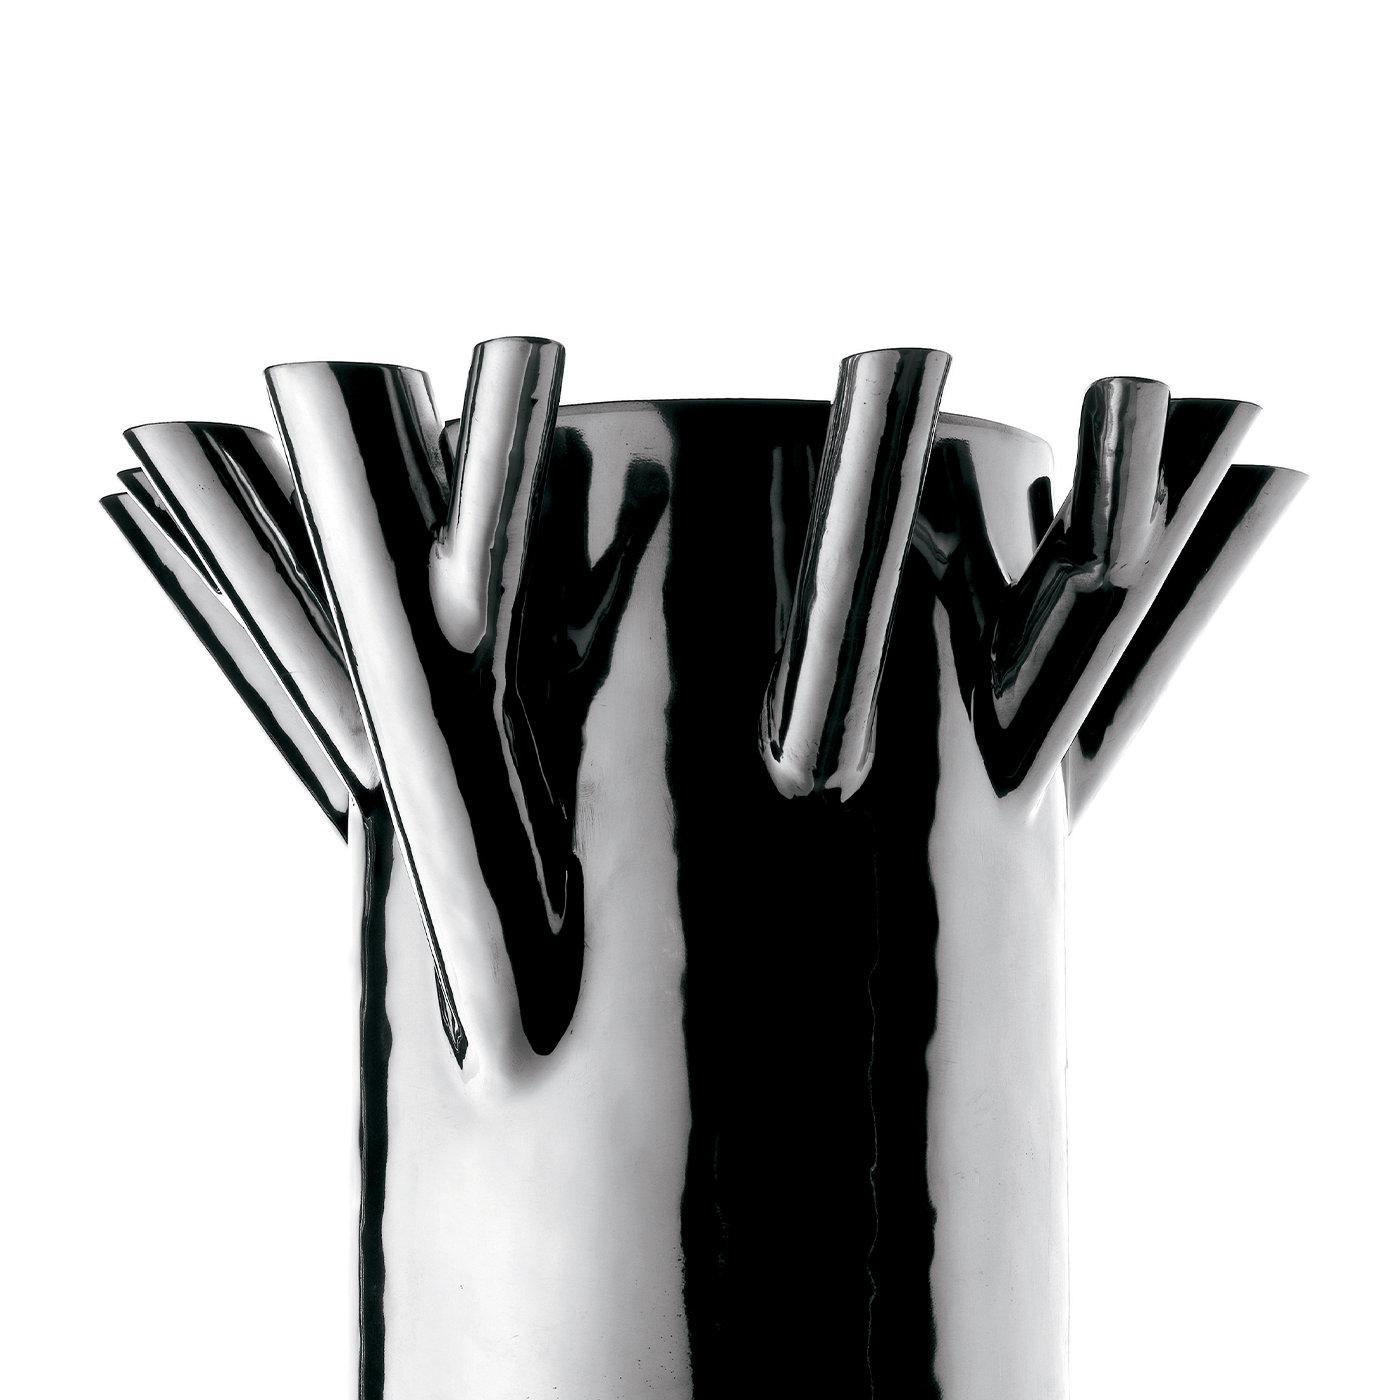 A solid log marked by a series of small branches, this vase is part of the Tredicivasi Collection (thirteen vases in English) designed by Mario Botta and crafted by Alfredo Marinoni. Versatile and unique at the same time, it allows for magnificent